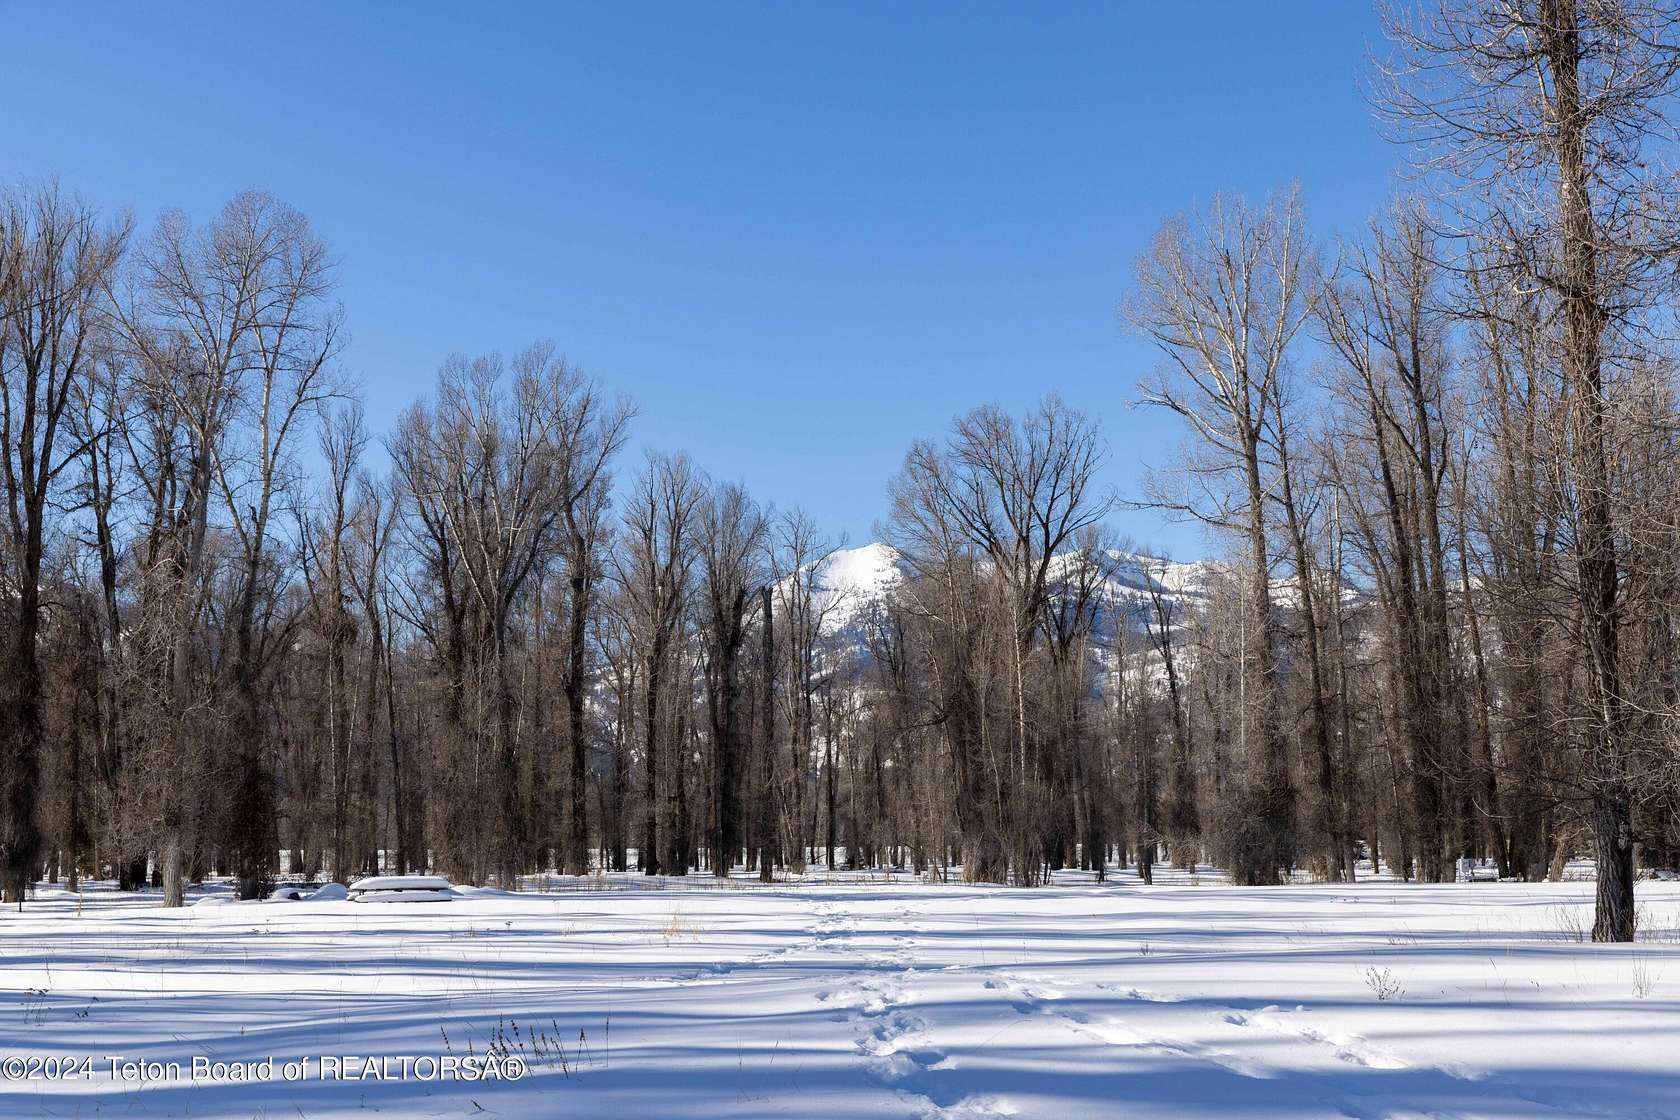 22 Acres of Land for Sale in Jackson, Wyoming